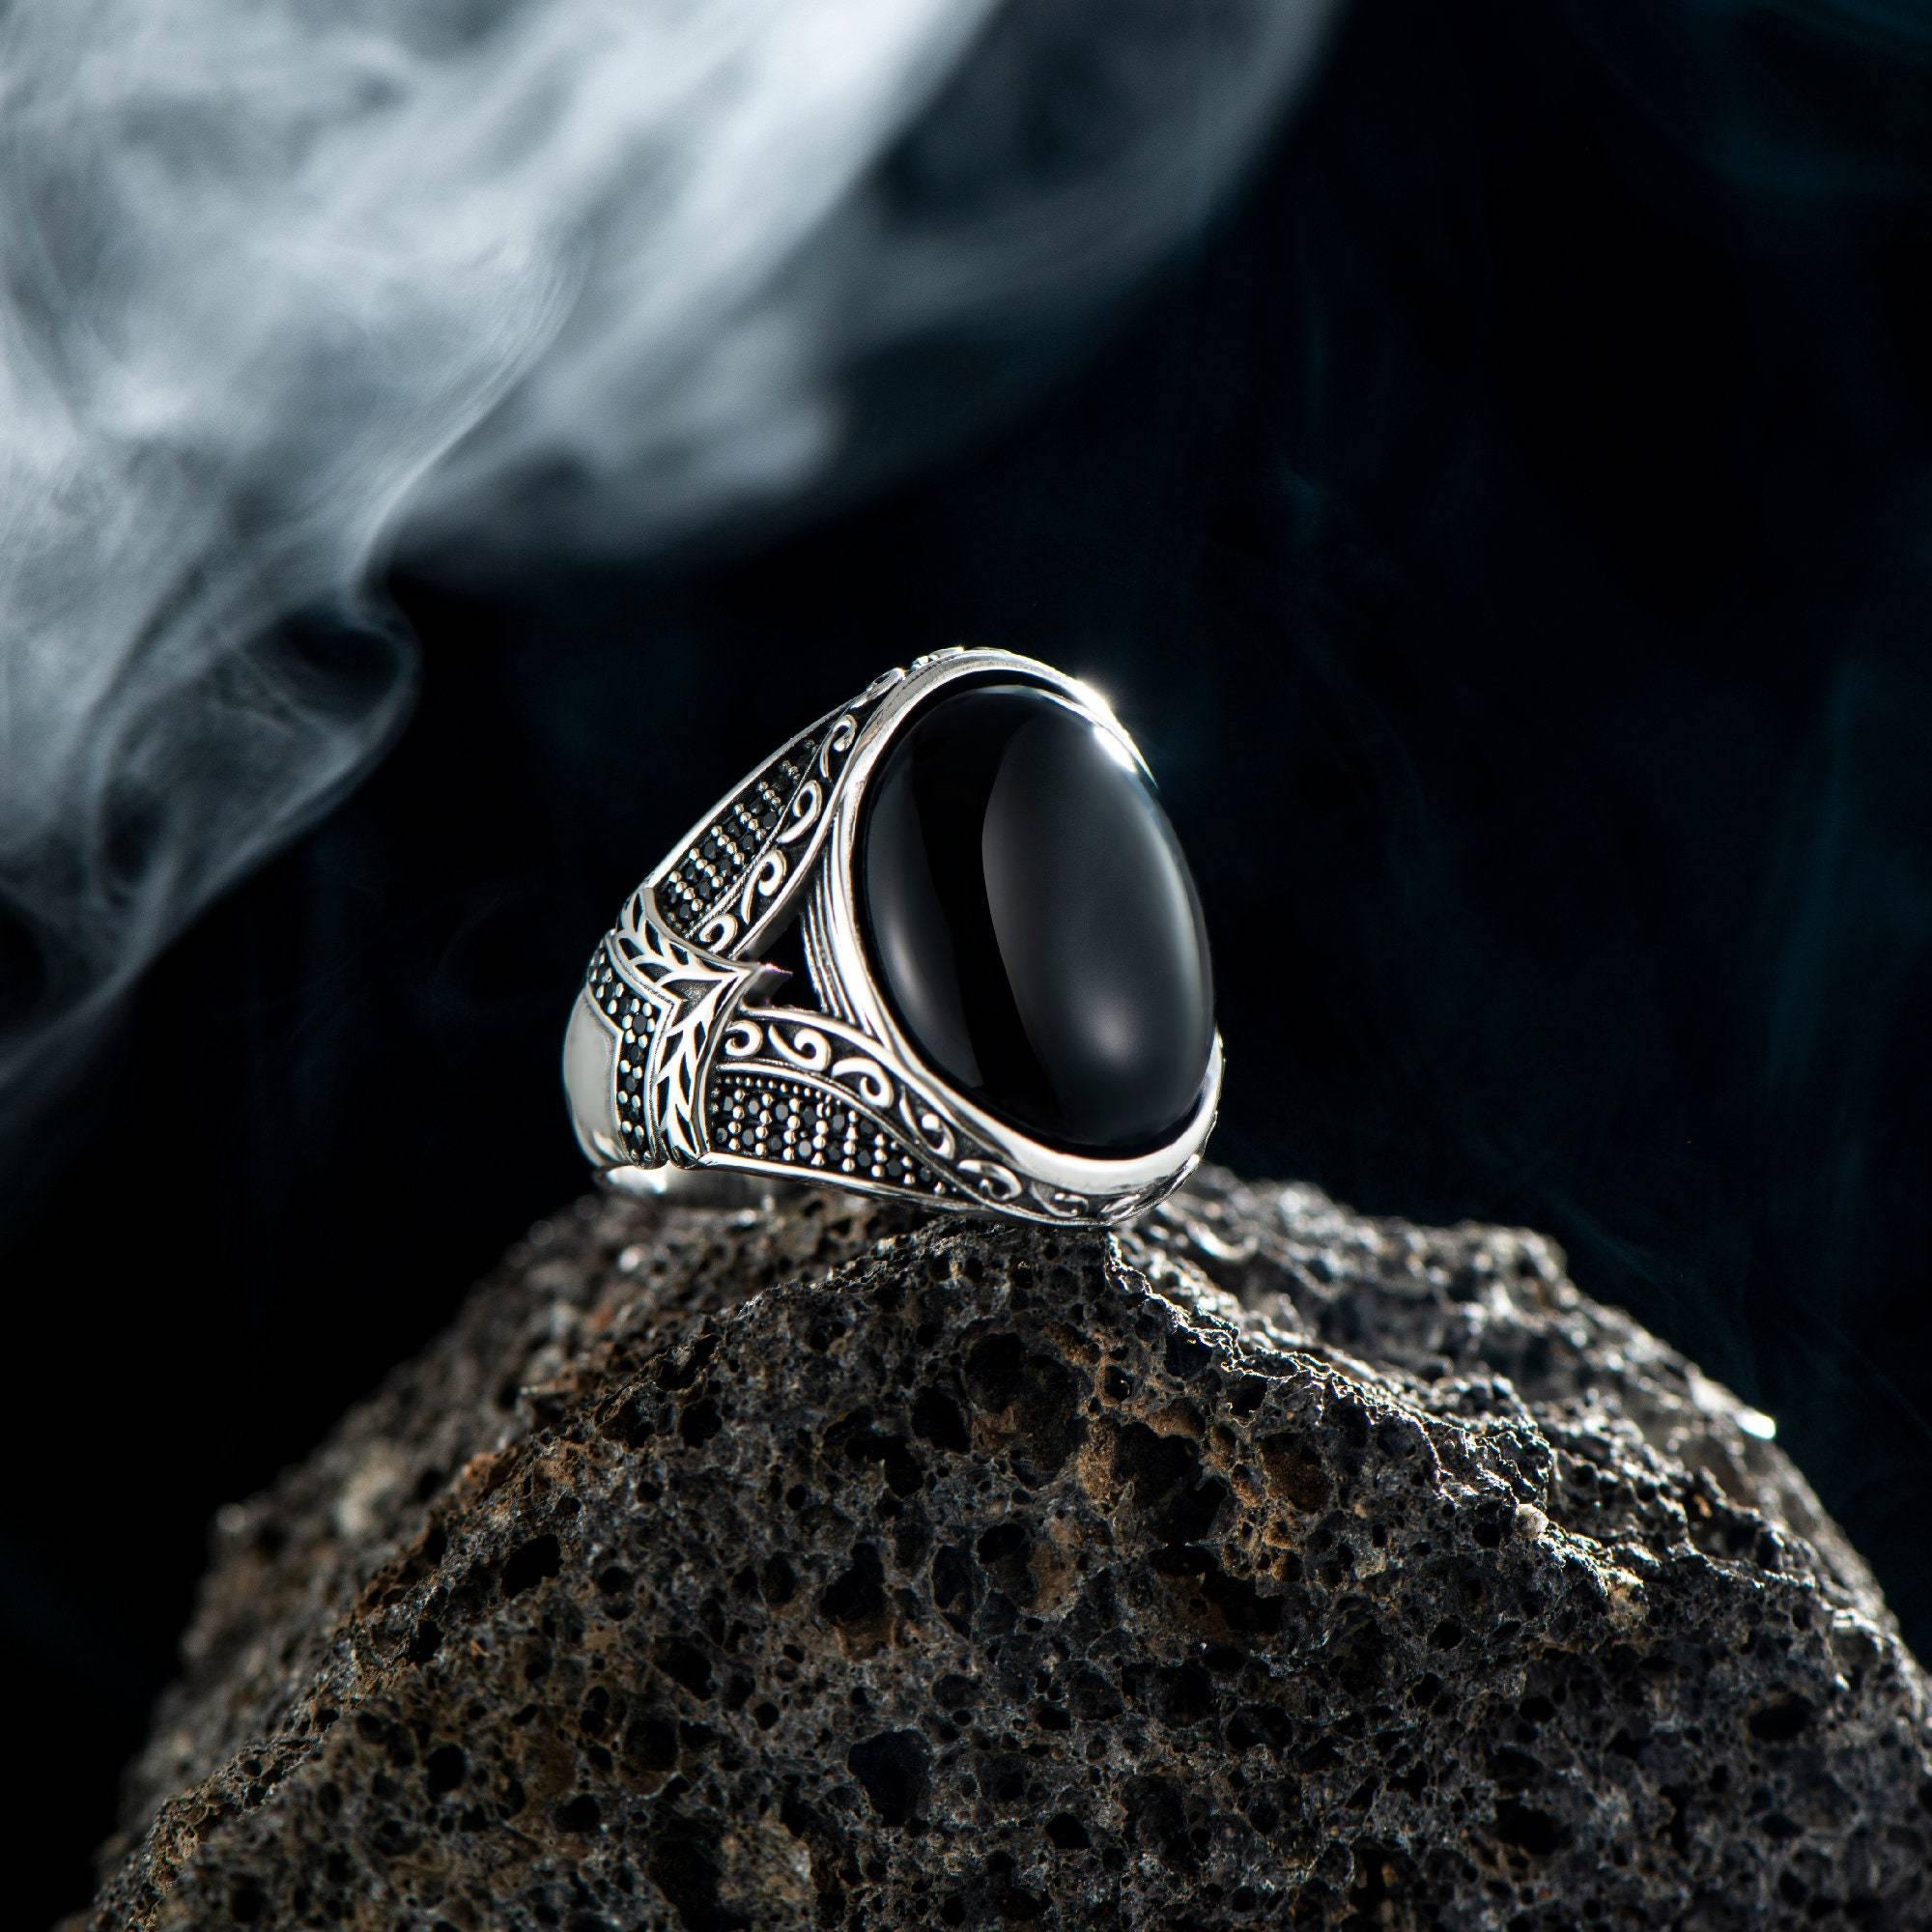 Black Onyx Ring, Oval Gemstone Ring, Black Zircon Stone Ring on the Band - OXO SILVER